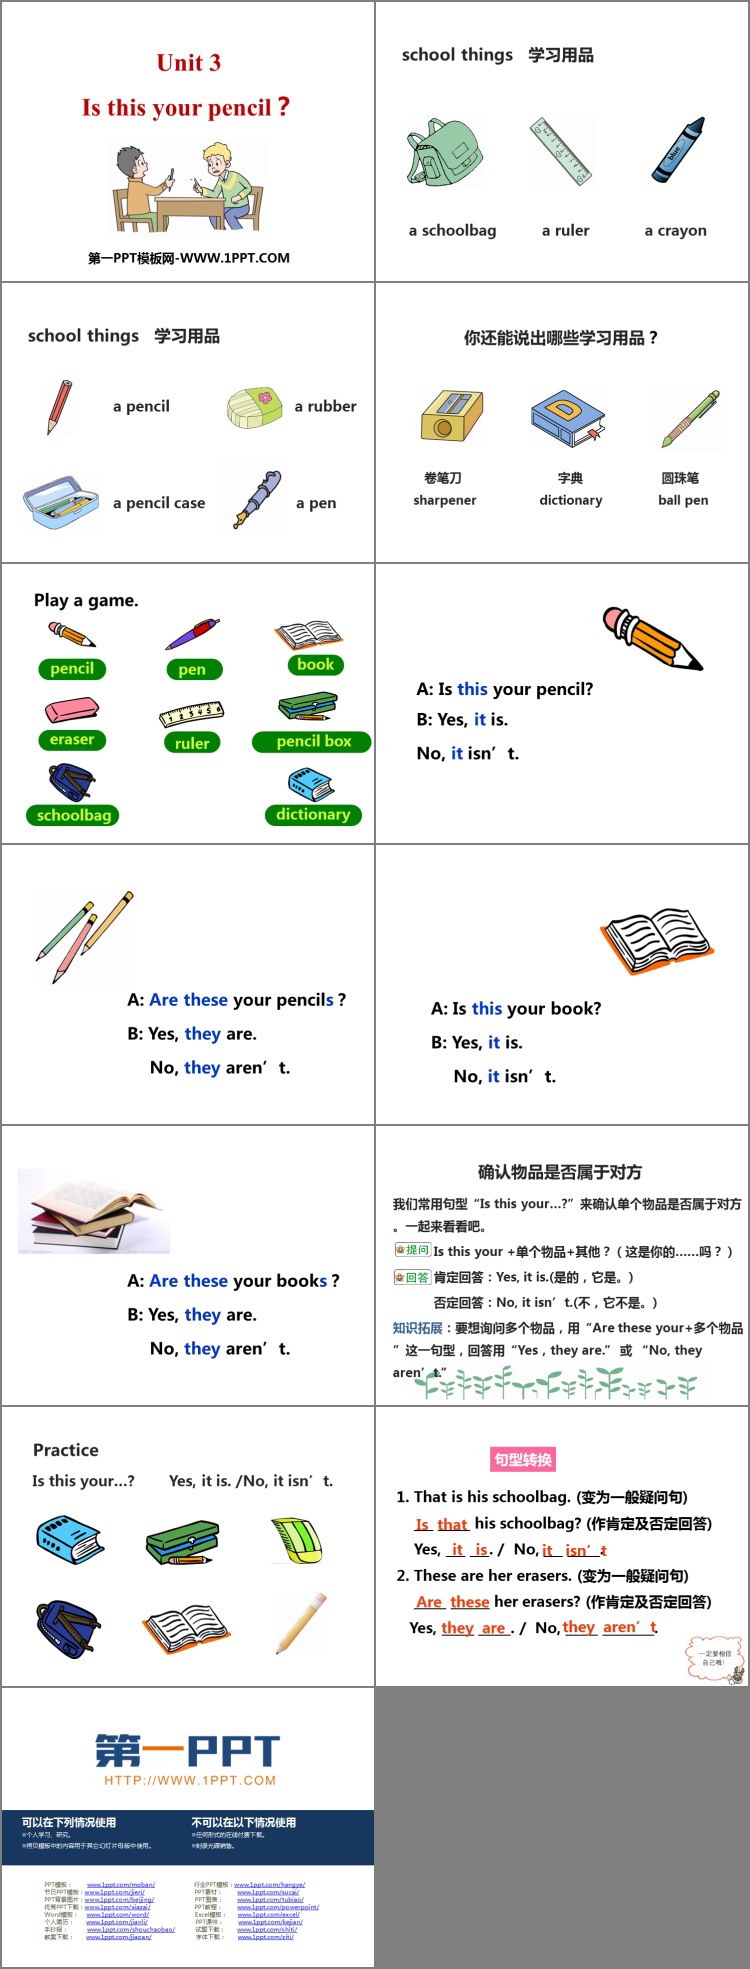 《Is this your pencil?》PPT精品课件-预览图02